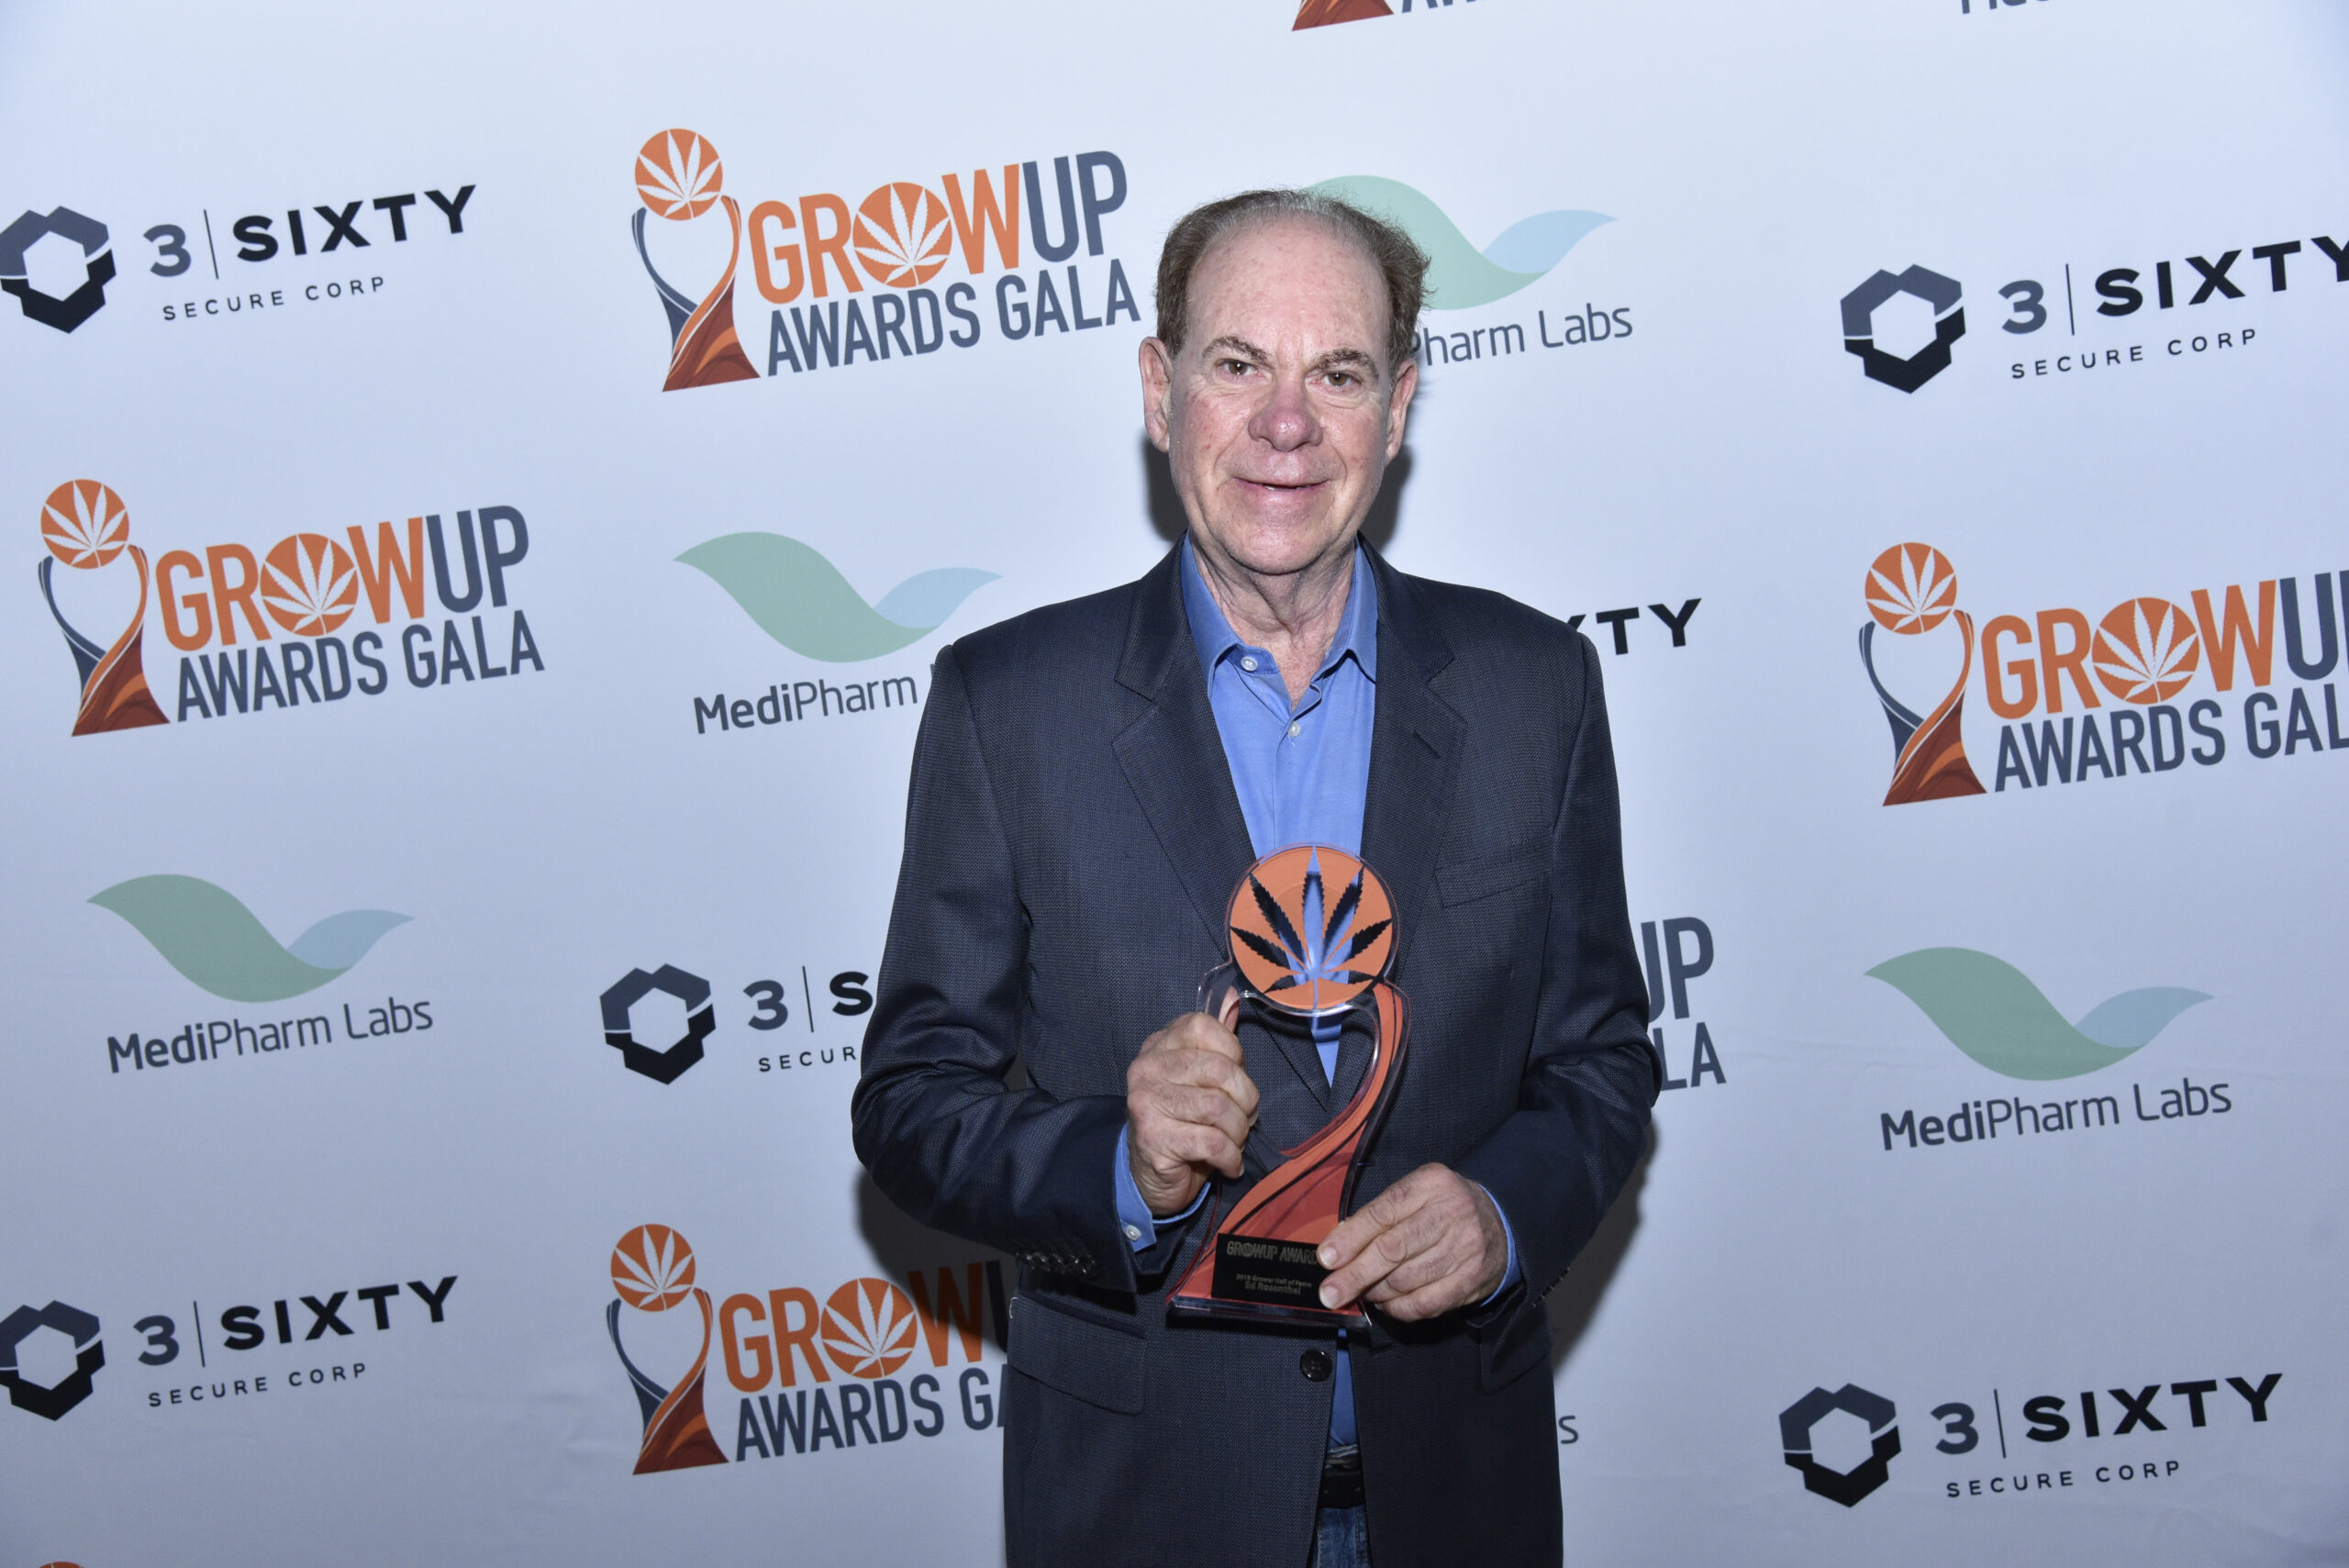 GROW UP CONFERENCE & EXPO ANNOUNCES 2019 AWARDS GALA WINNERS